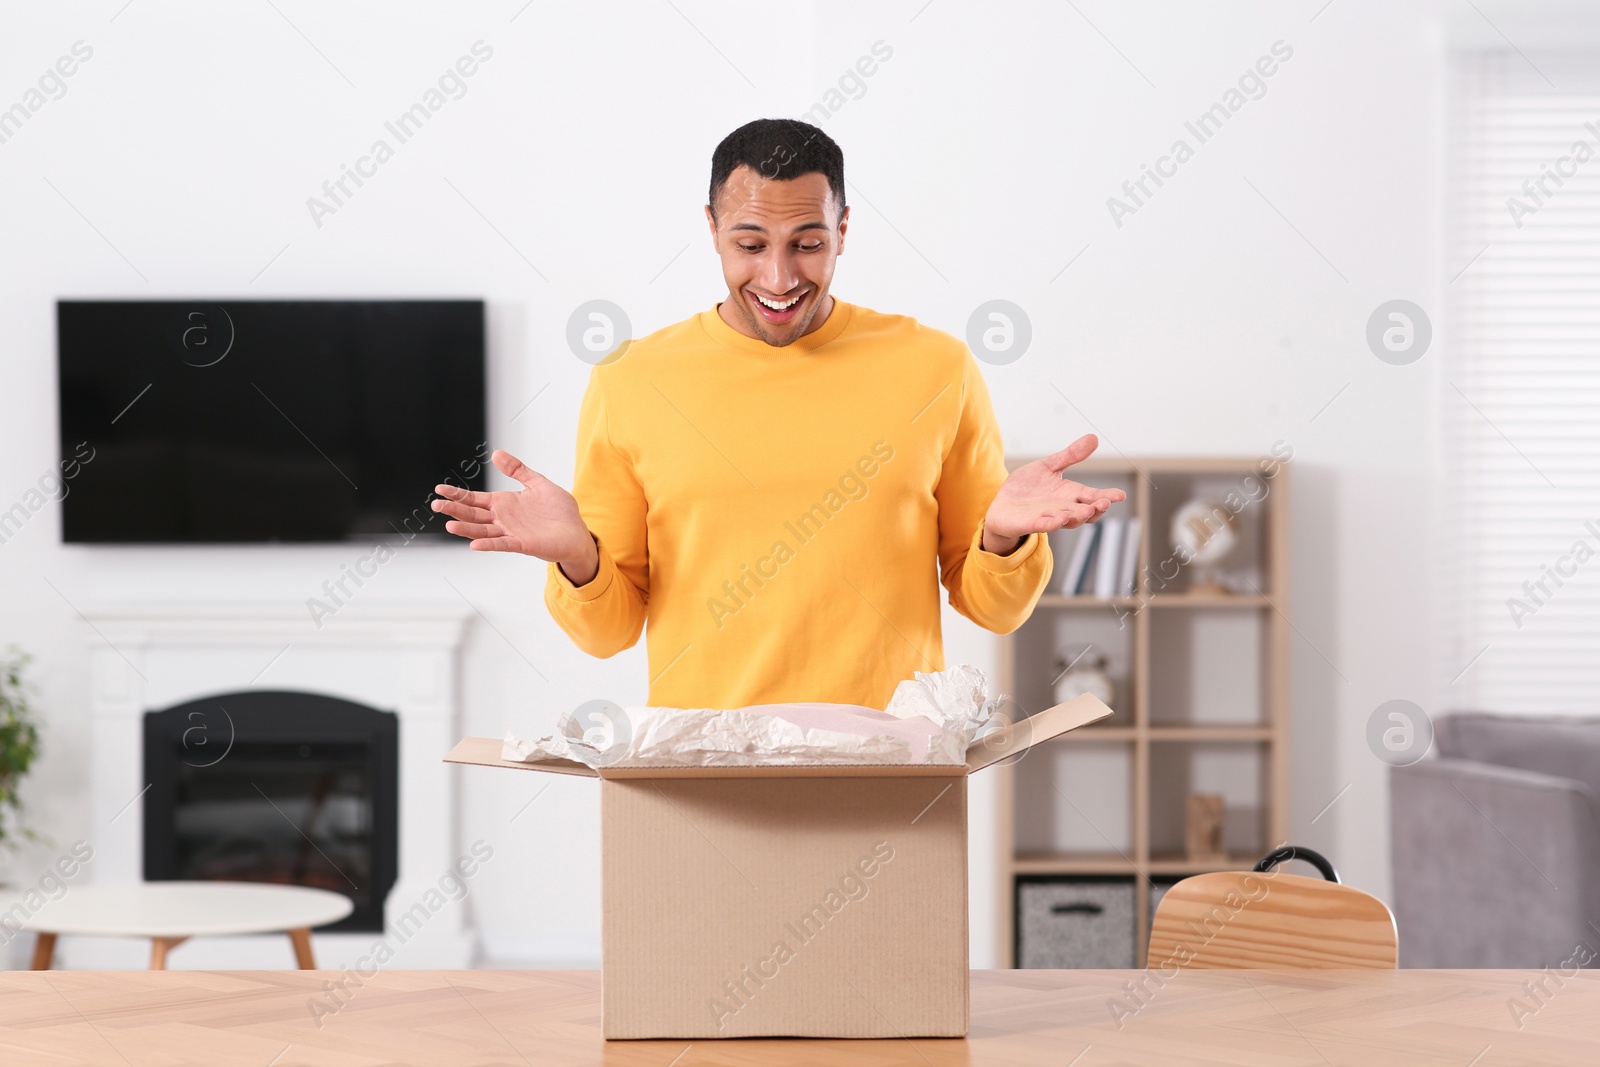 Photo of Emotional young man opening parcel at table indoors. Internet shopping